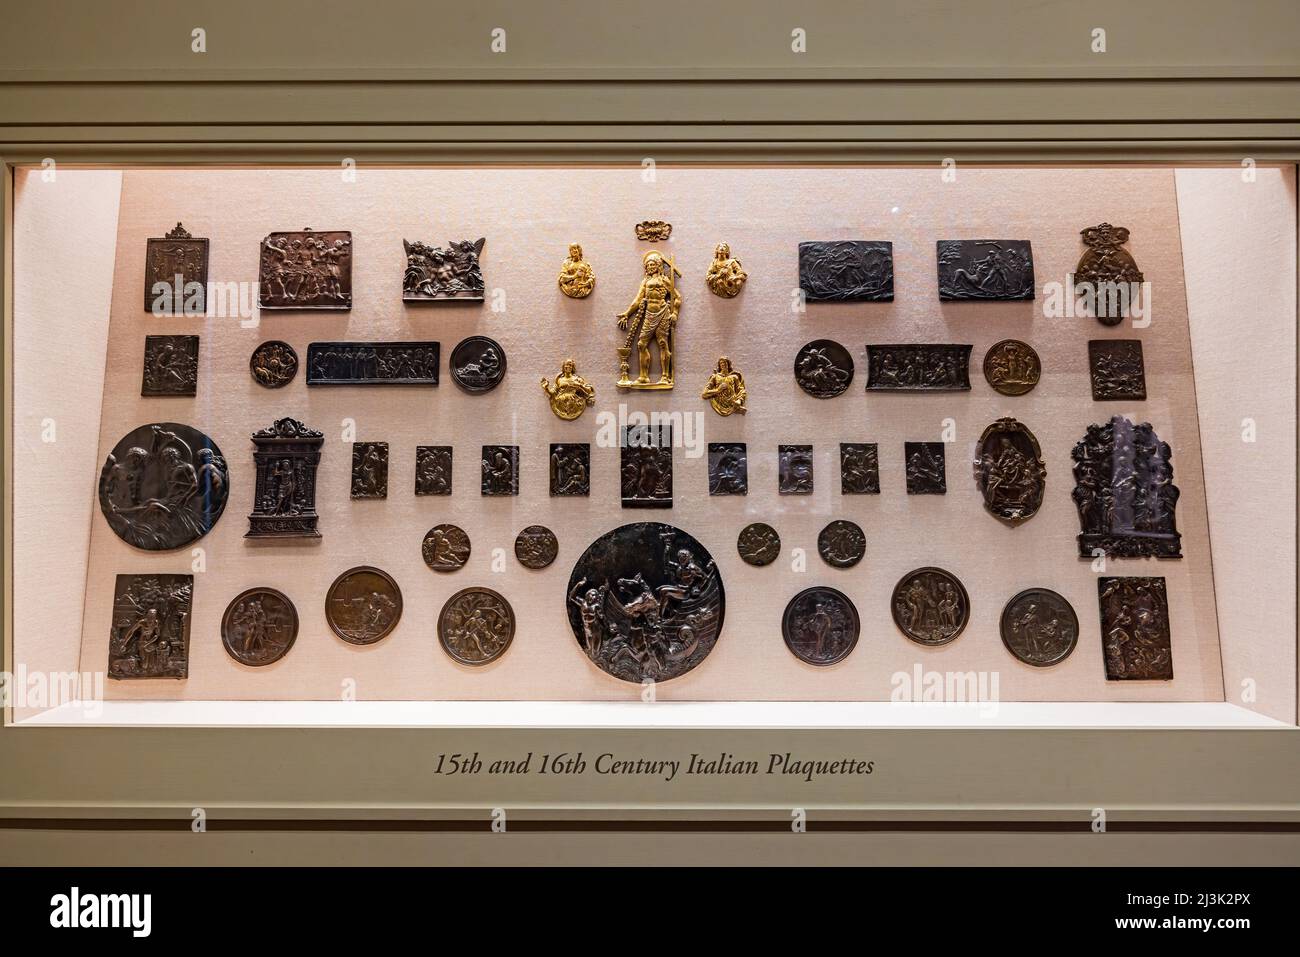 Washington DC, MAR 31 2022 - Close up shot of the 15th and 16th Italian Plaquettes display in the National Gallery of Art Stock Photo